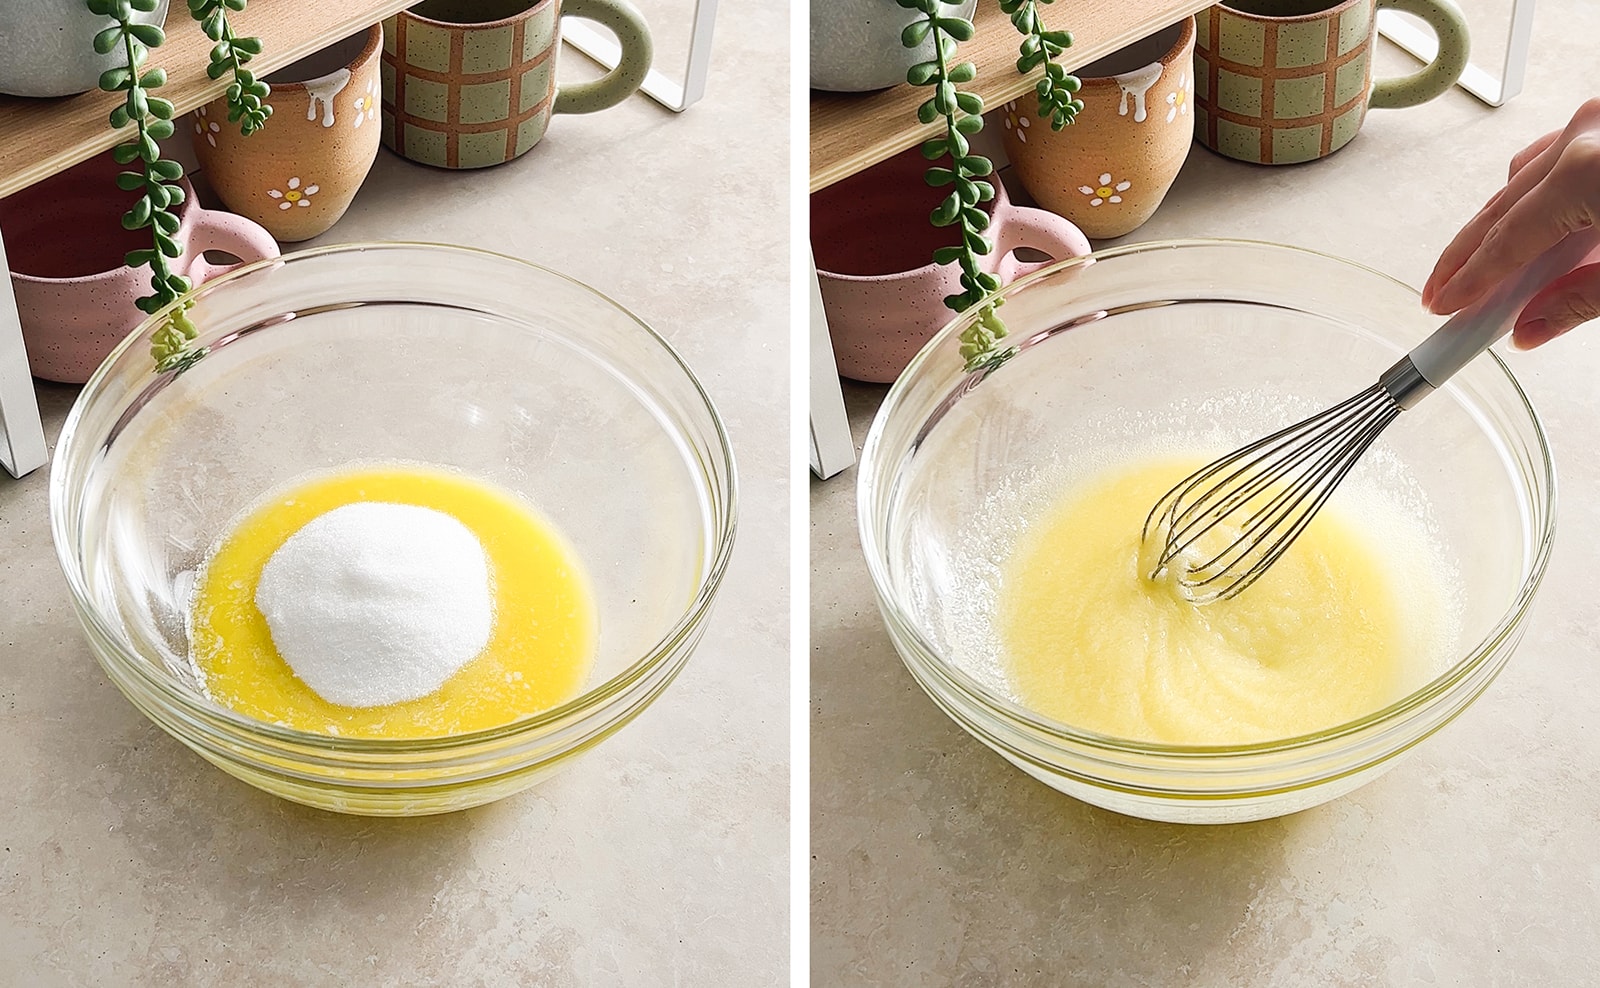 Left to right: melted butter and sugar in a bowl, hand whisking butter and sugar together.